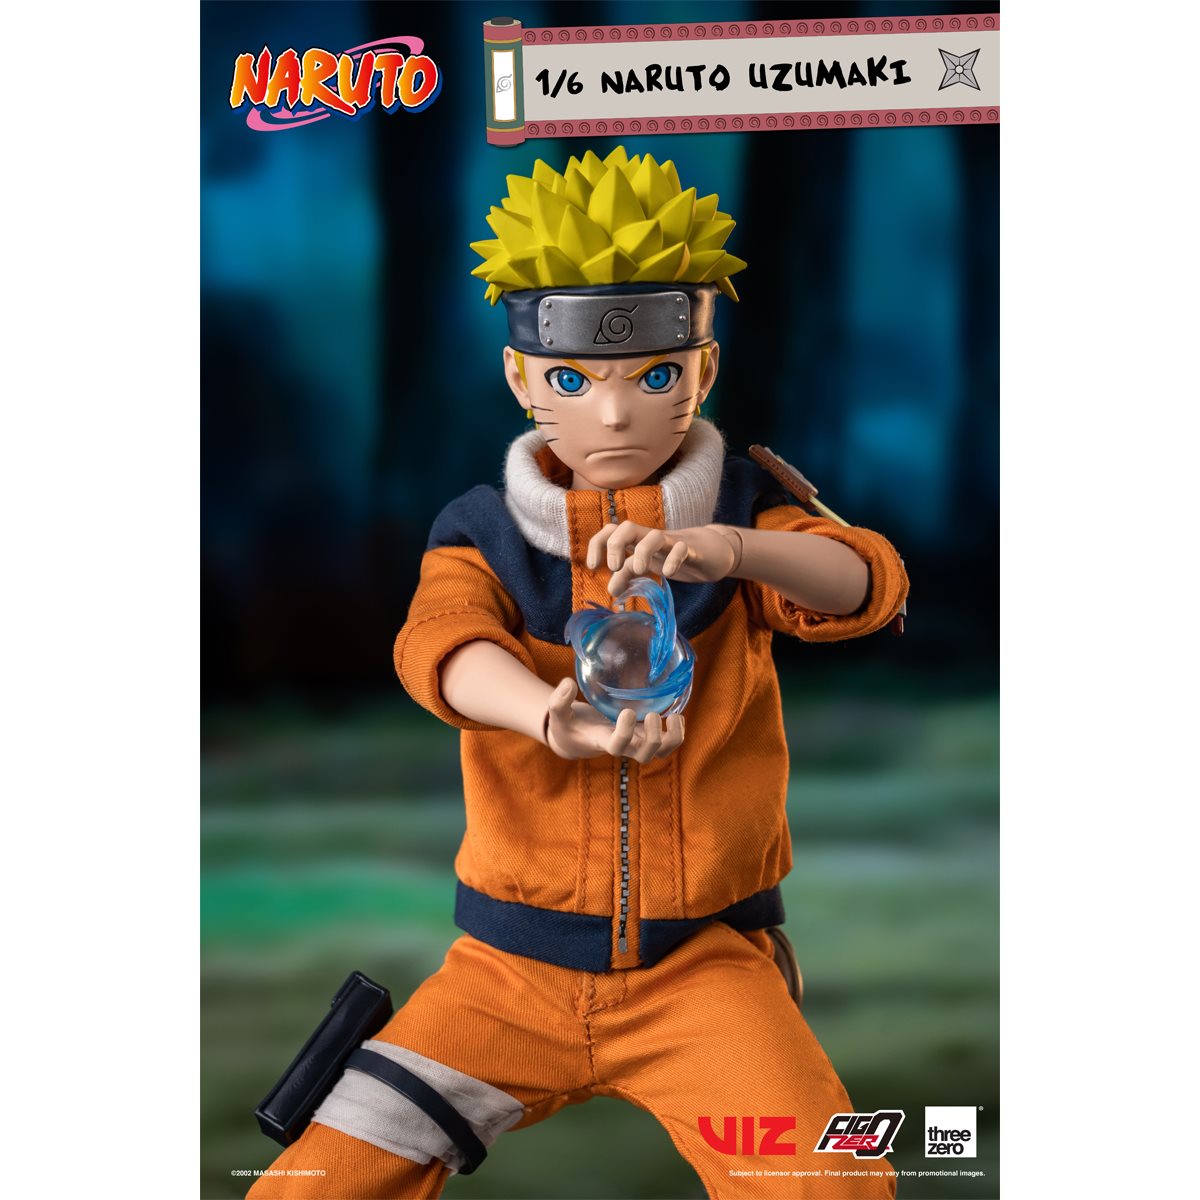 Naruto and the Three Wishes (Anime) –